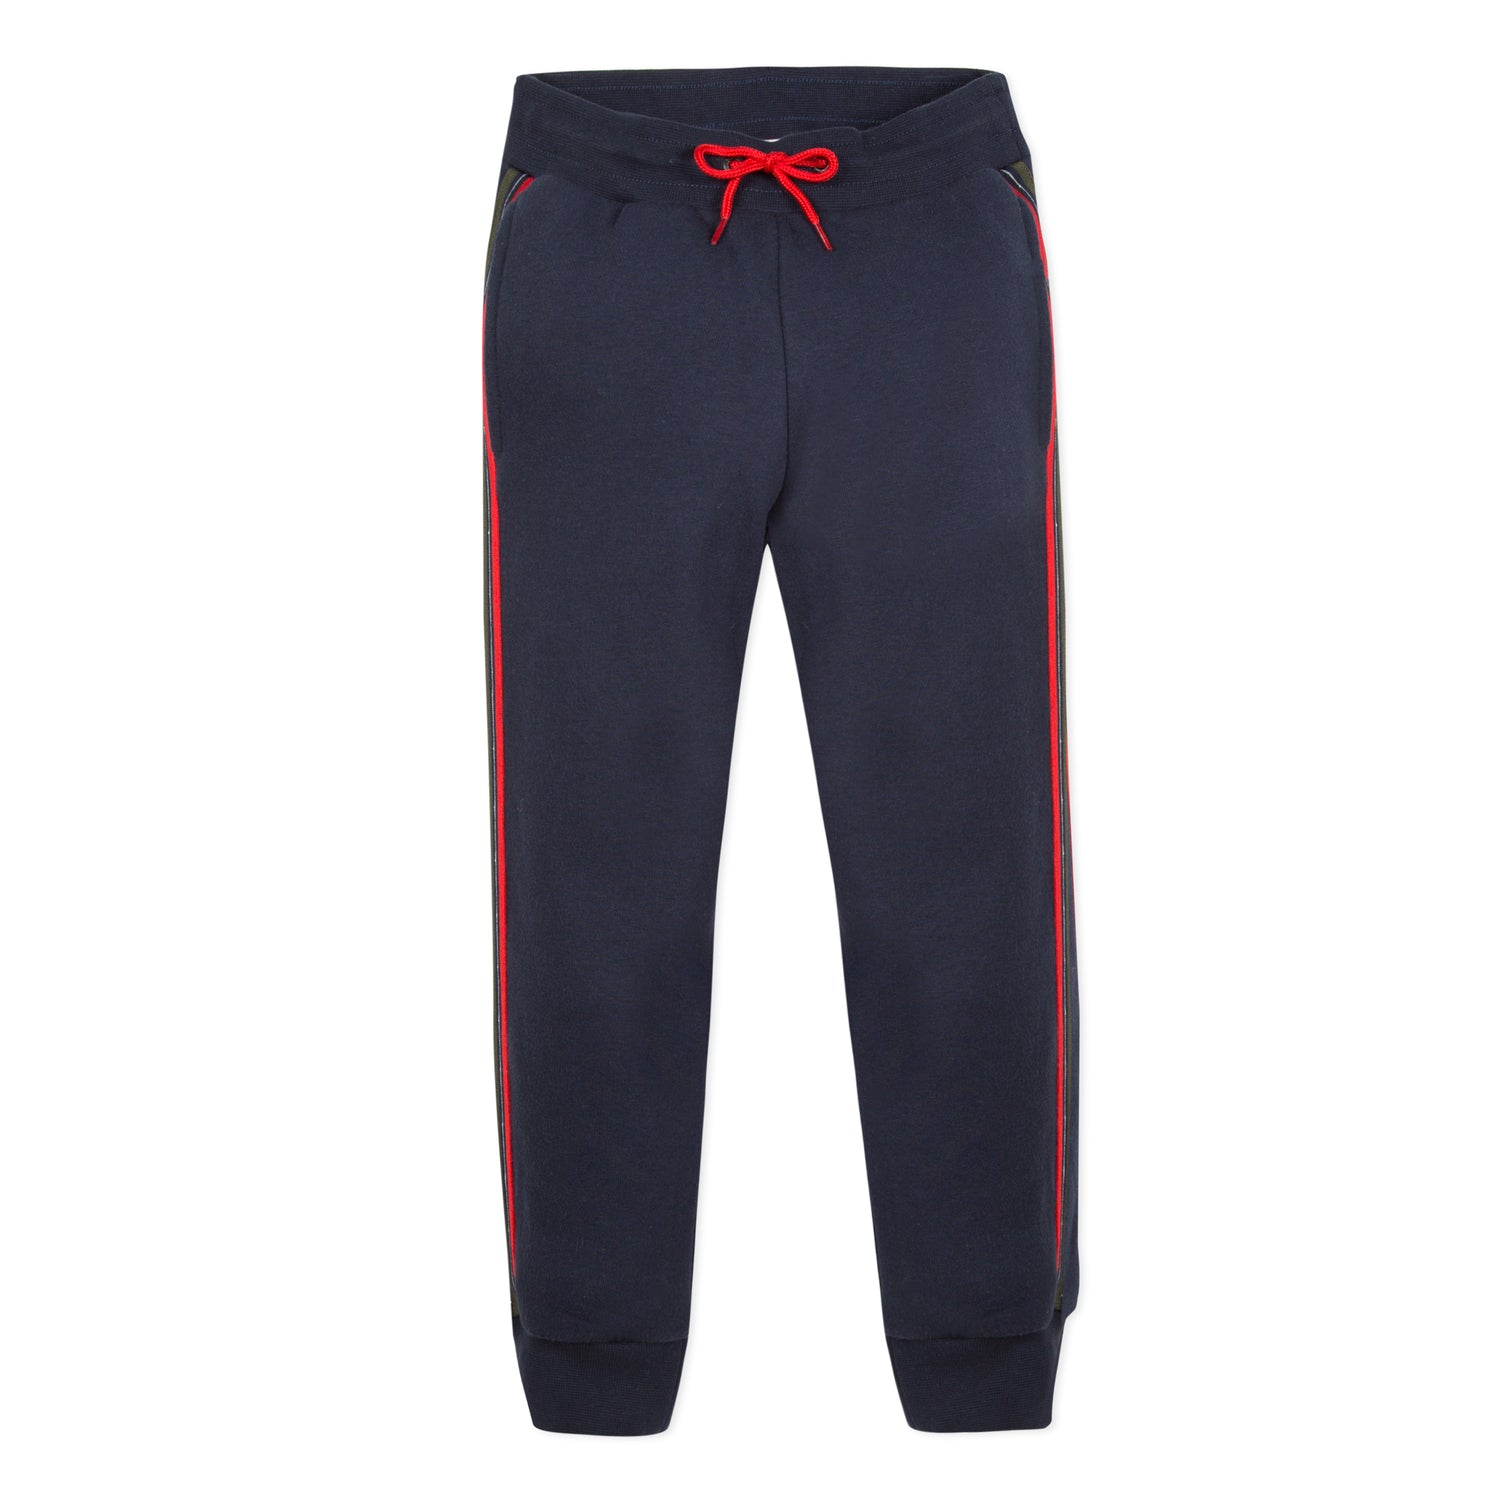 Boys Navy Cotton Trousers